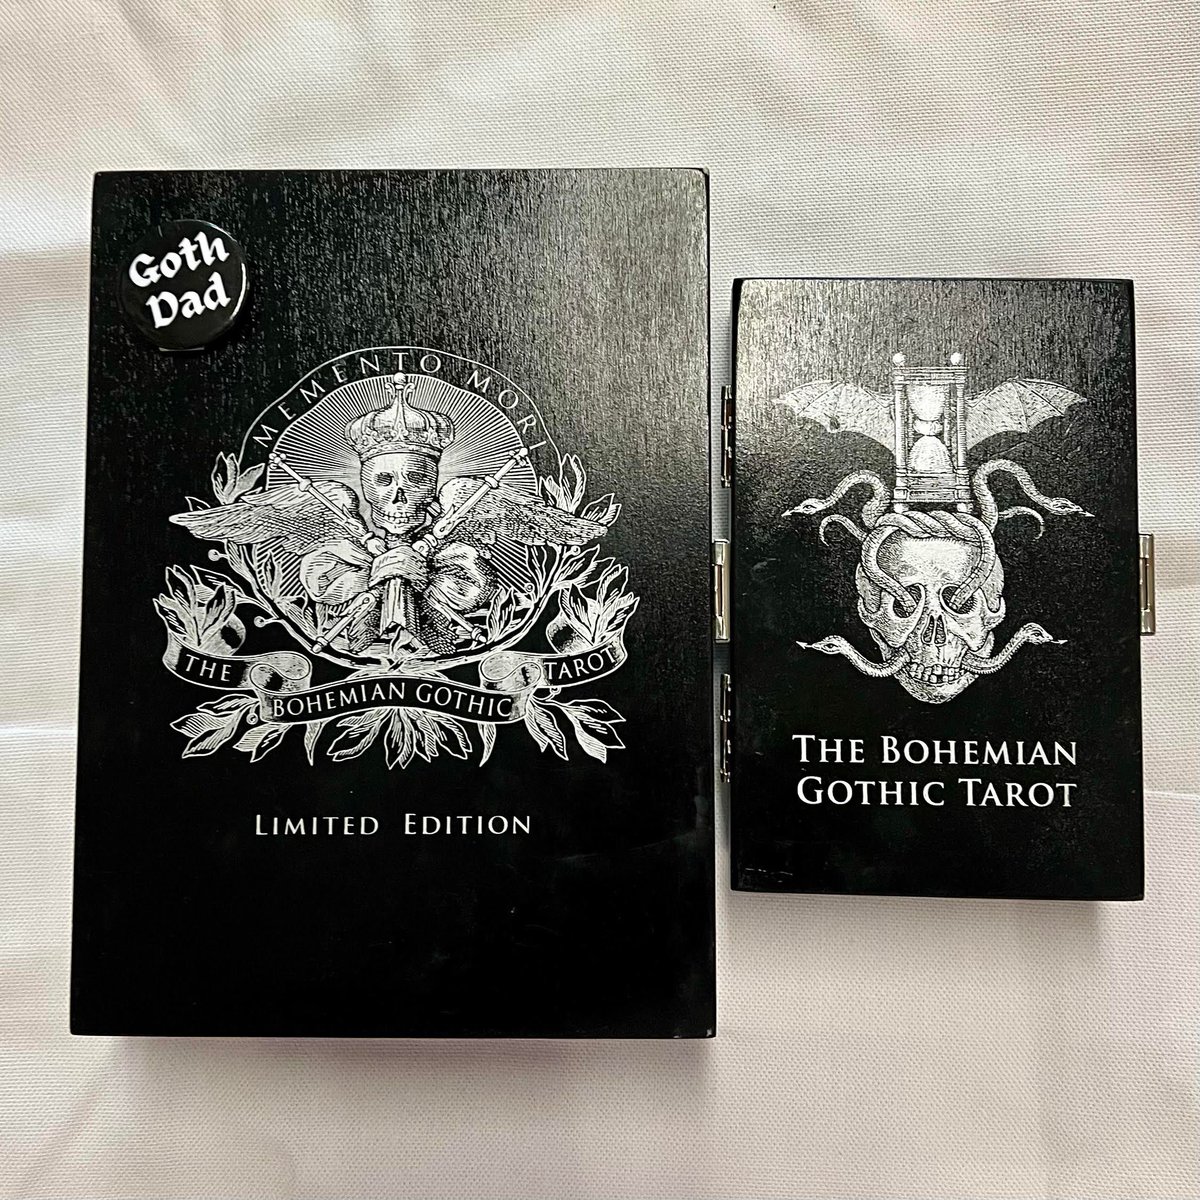 Two editions of the Bohemian Gothic Tarot came in used! Limited edition for $150, standard for $60. They both come in a stunning wooden box and are available at Clement🖤